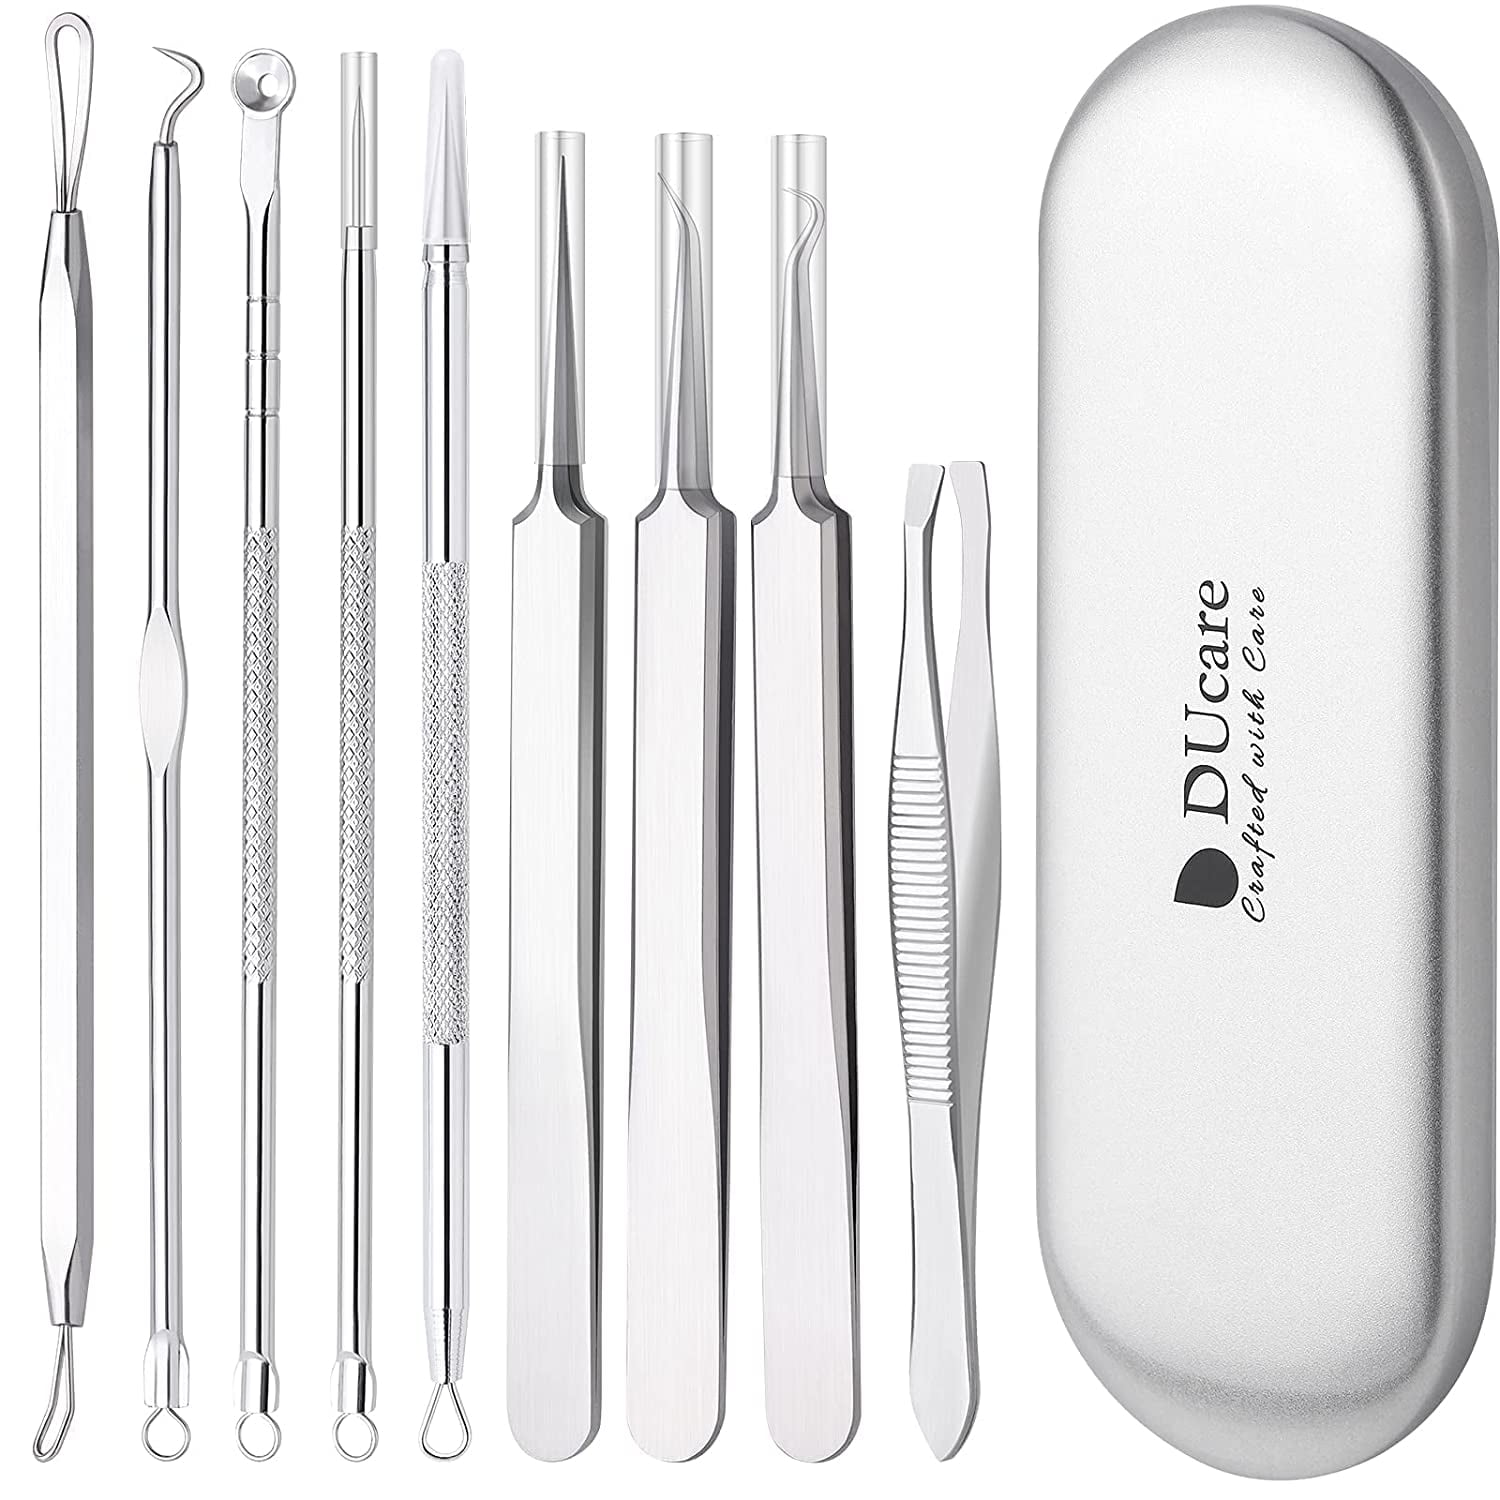 Popper Tool Kit 9 Pcs Blackhead Remover Tools Pimple Extractor Acne Tools Metal Case for Pimples Blackheads Forehead Zit Removing - Walmart.com